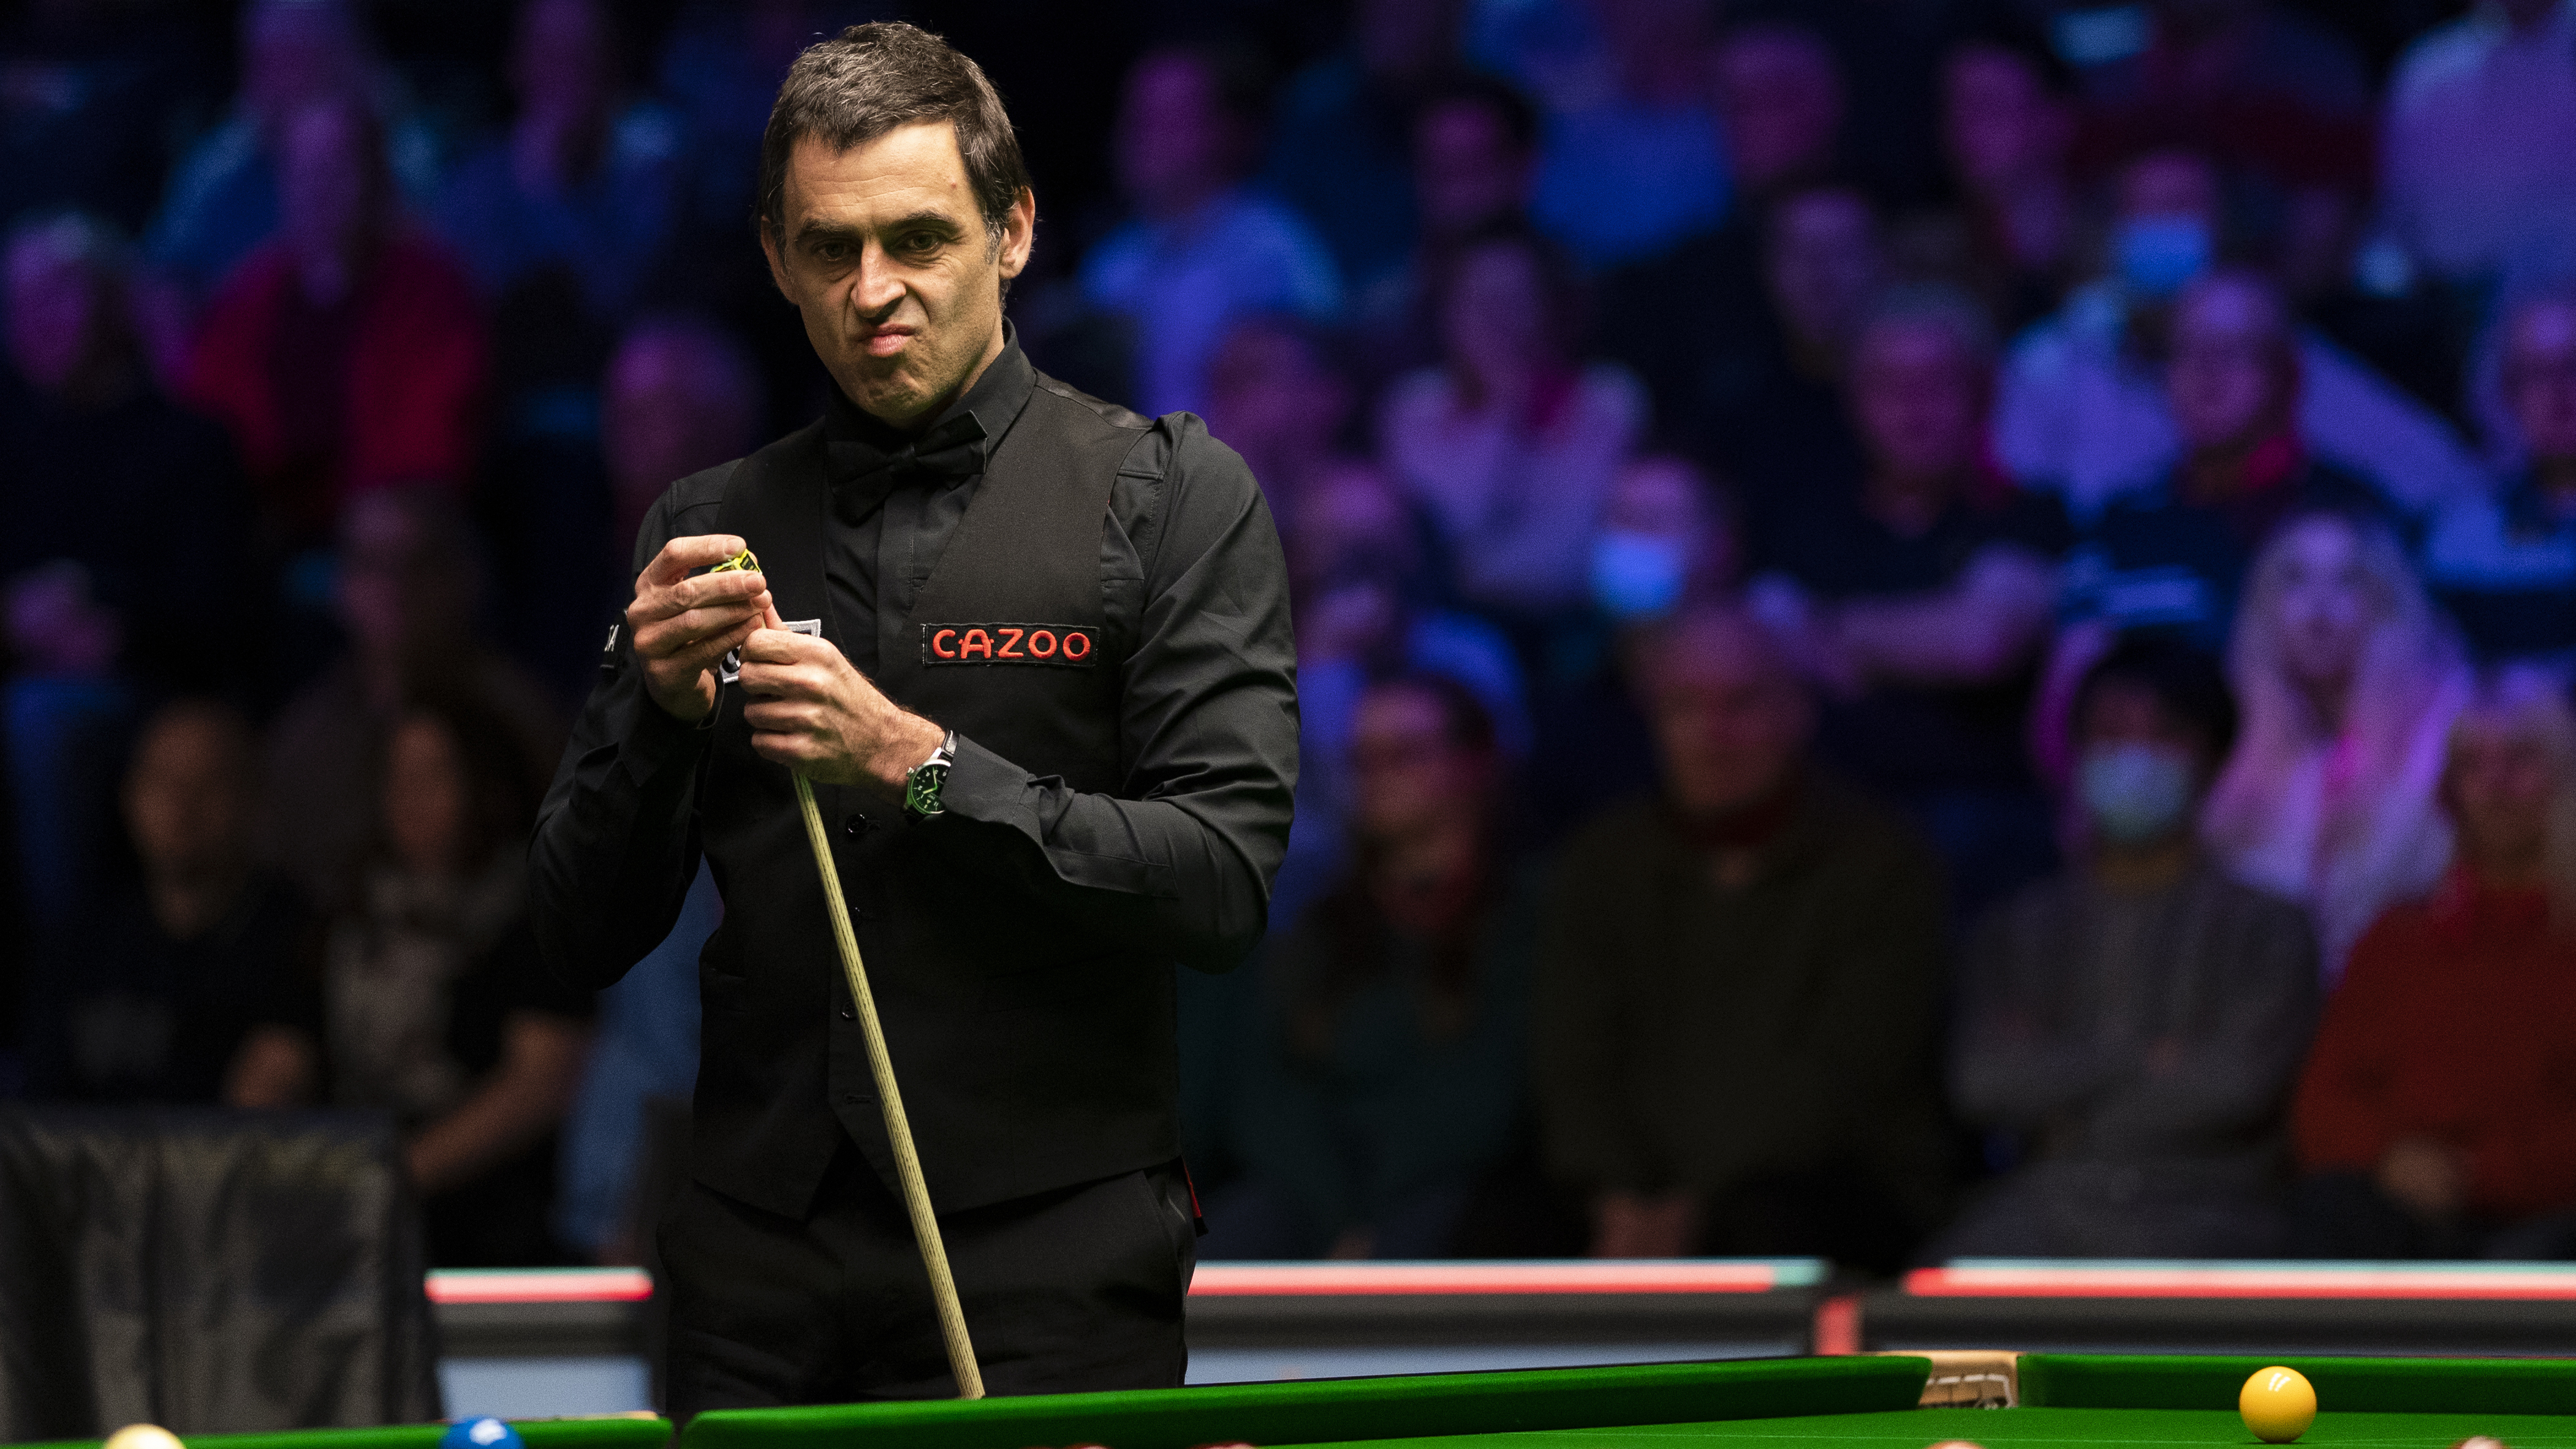 UK Championship draw, results, schedule, how to watch on TV and more